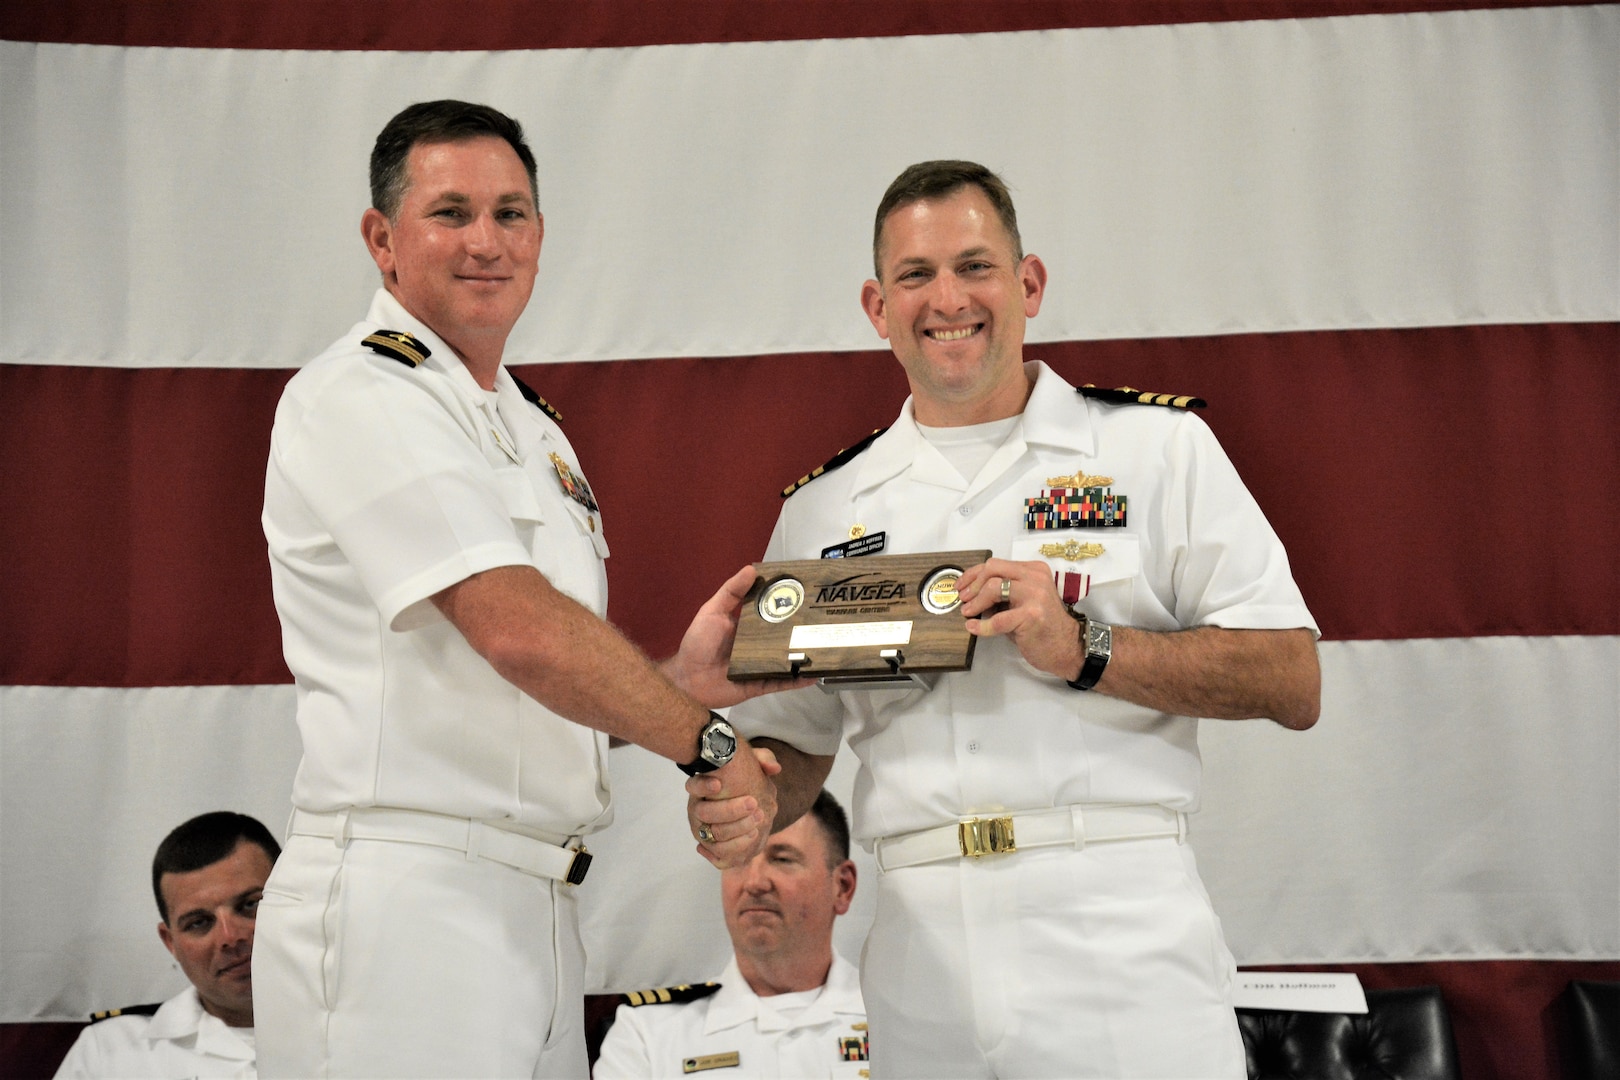 IMAGE: (Left to right) Cmdr. Casey Plew, Commanding Officer, Naval Surface Warfare Center Dahlgren Division (NSWCDD), presents Cmdr. Andrew Hoffman with a farewell plaque for his three plus years as NSWCDD Dam Neck Activity’s commanding officer. More than 200 Sailors and guests attended a traditional Change of Command ceremony at Naval Air Station (NAS) Oceana’s Center for Naval Aviation Technical Training Unit’s ceremonial hangar aboard NAS Oceana June 27 where Hoffman was relieved of command by Cmdr. Joseph Oravec. Oravec became the command’s 28th commanding officer.